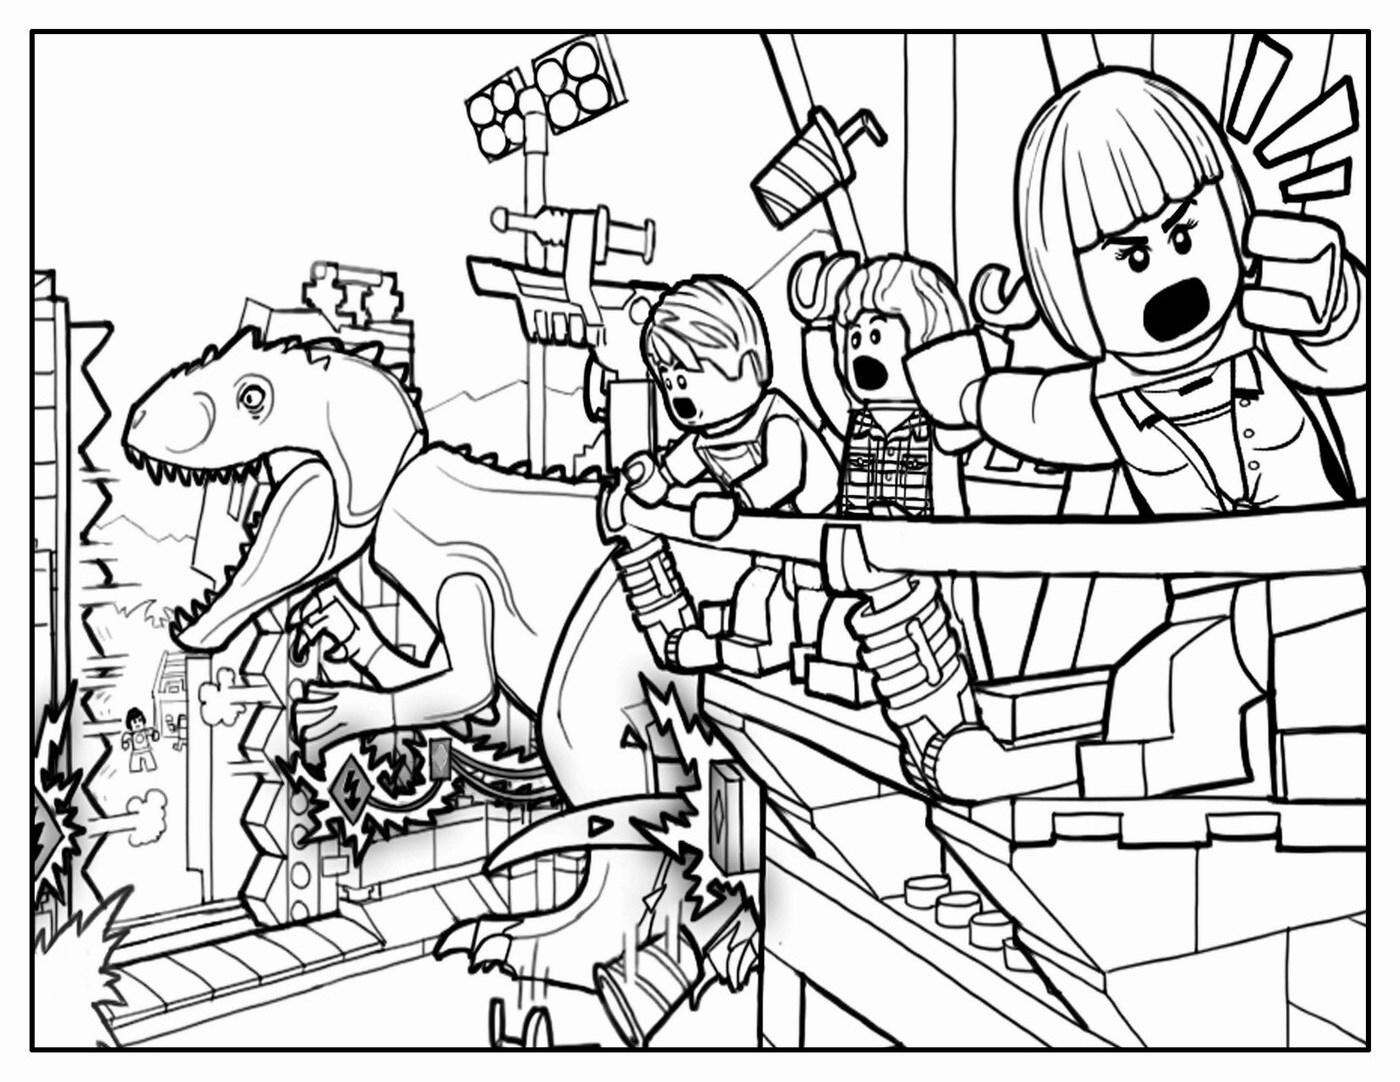 Coloring Pages Jurassic Park (Movies) - Printable Coloring Pages destiné Dessin Jurassic Park